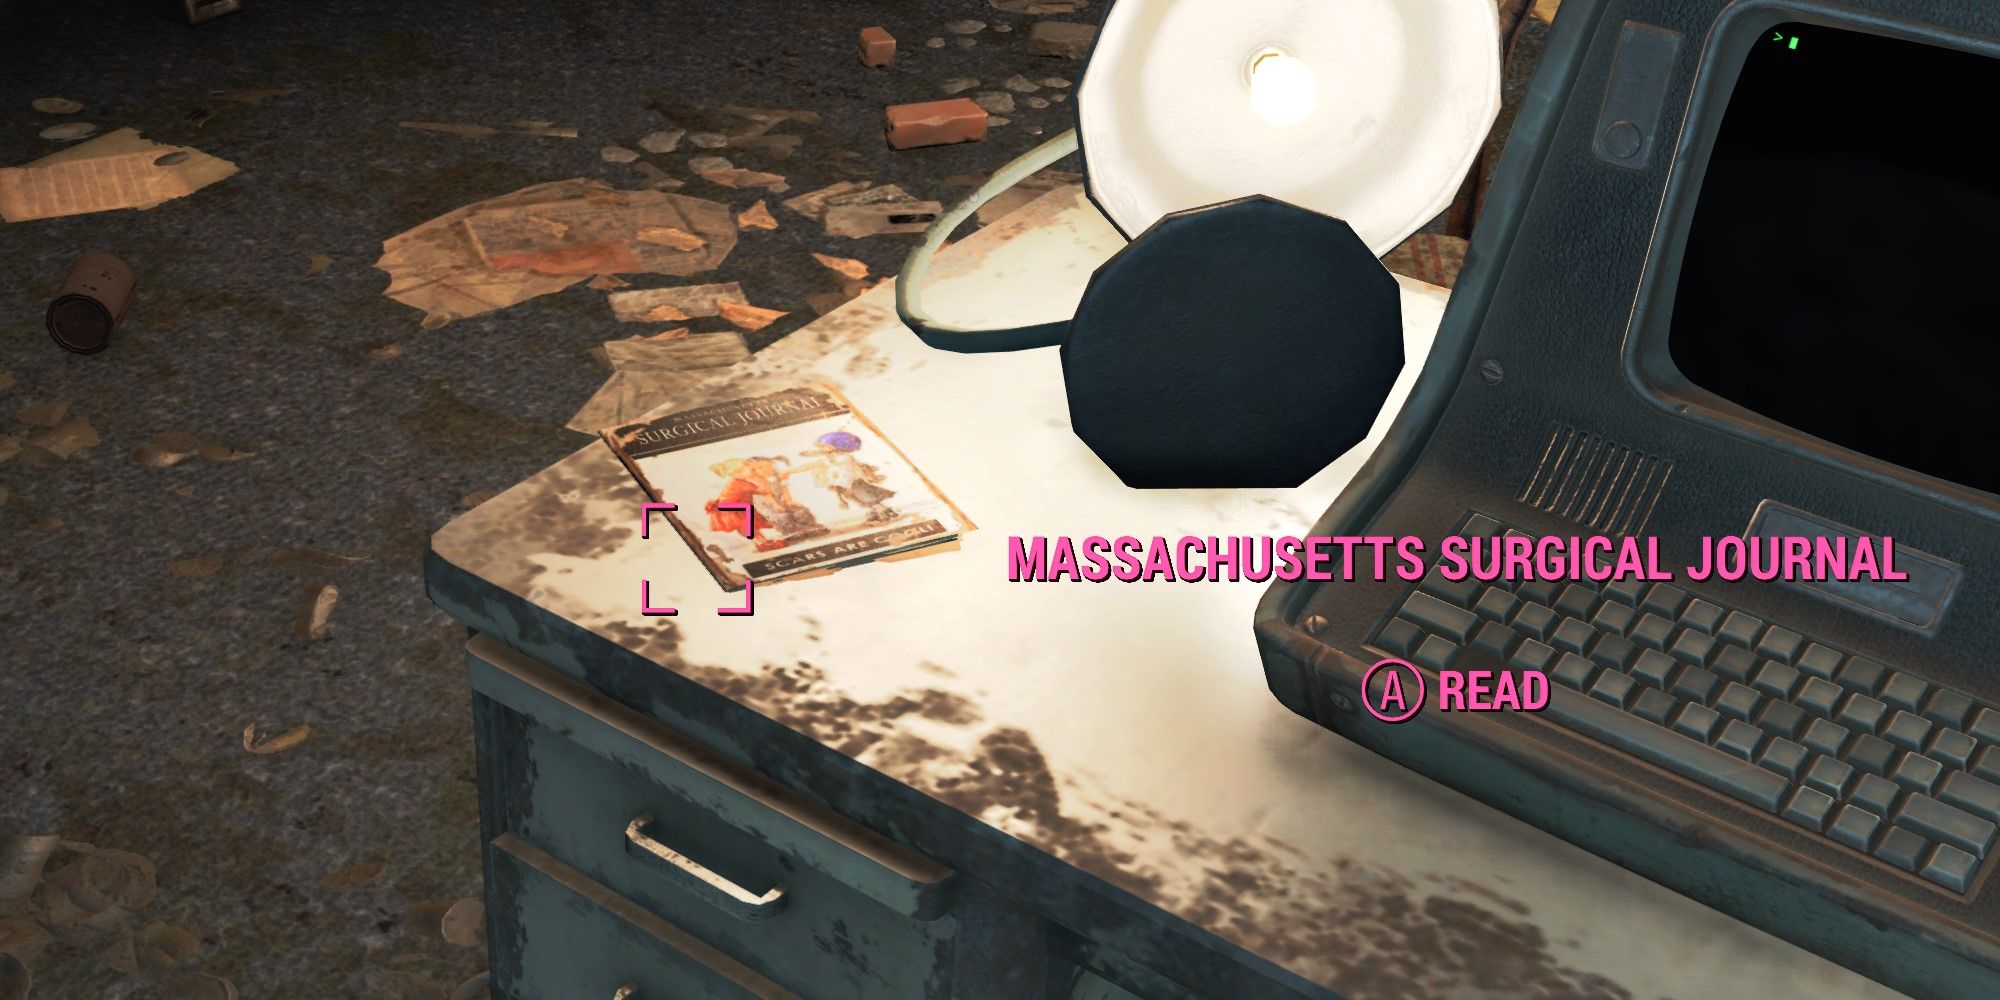 Fallout 4 Cambridge Polymer Labs Massachusetts Surgical Journal on desk